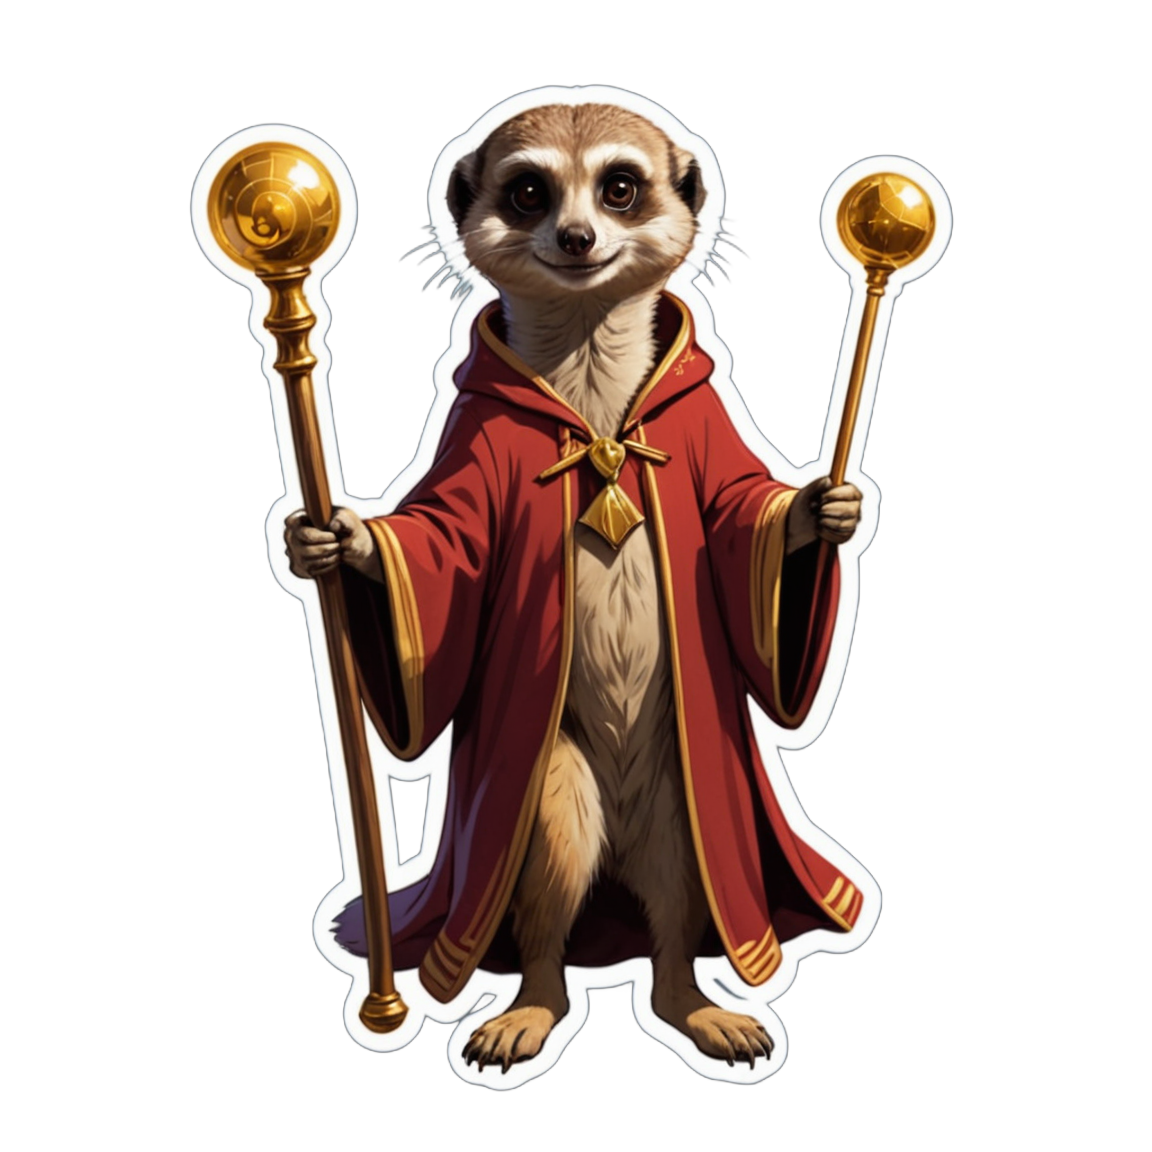 A meerkat magician with a cloak of illusions and a wand of wonder